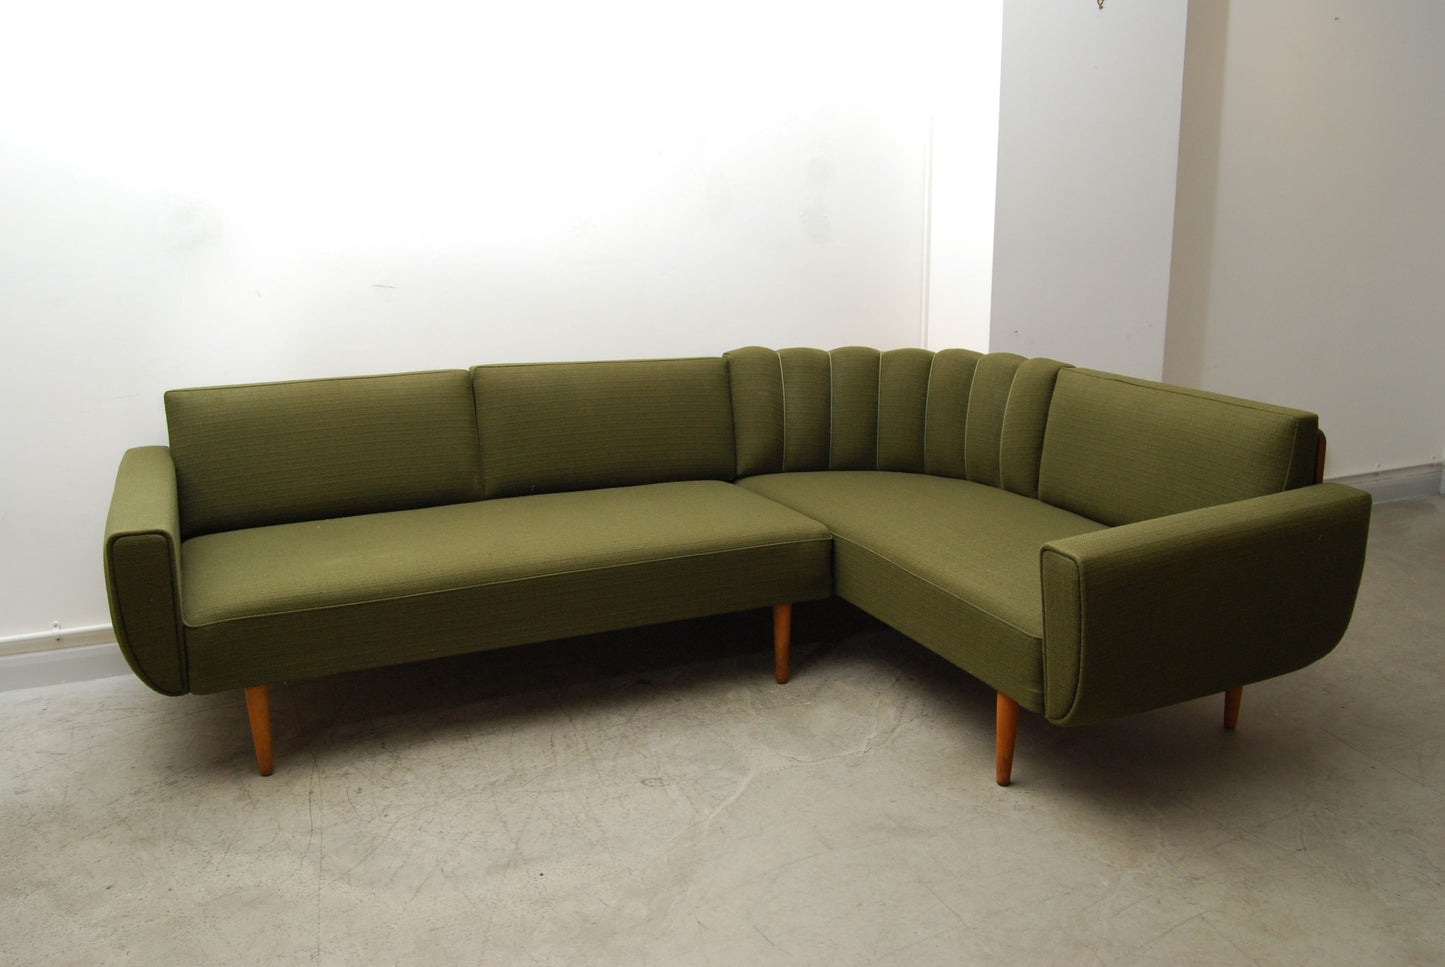 L-shaped sofa / sofabed